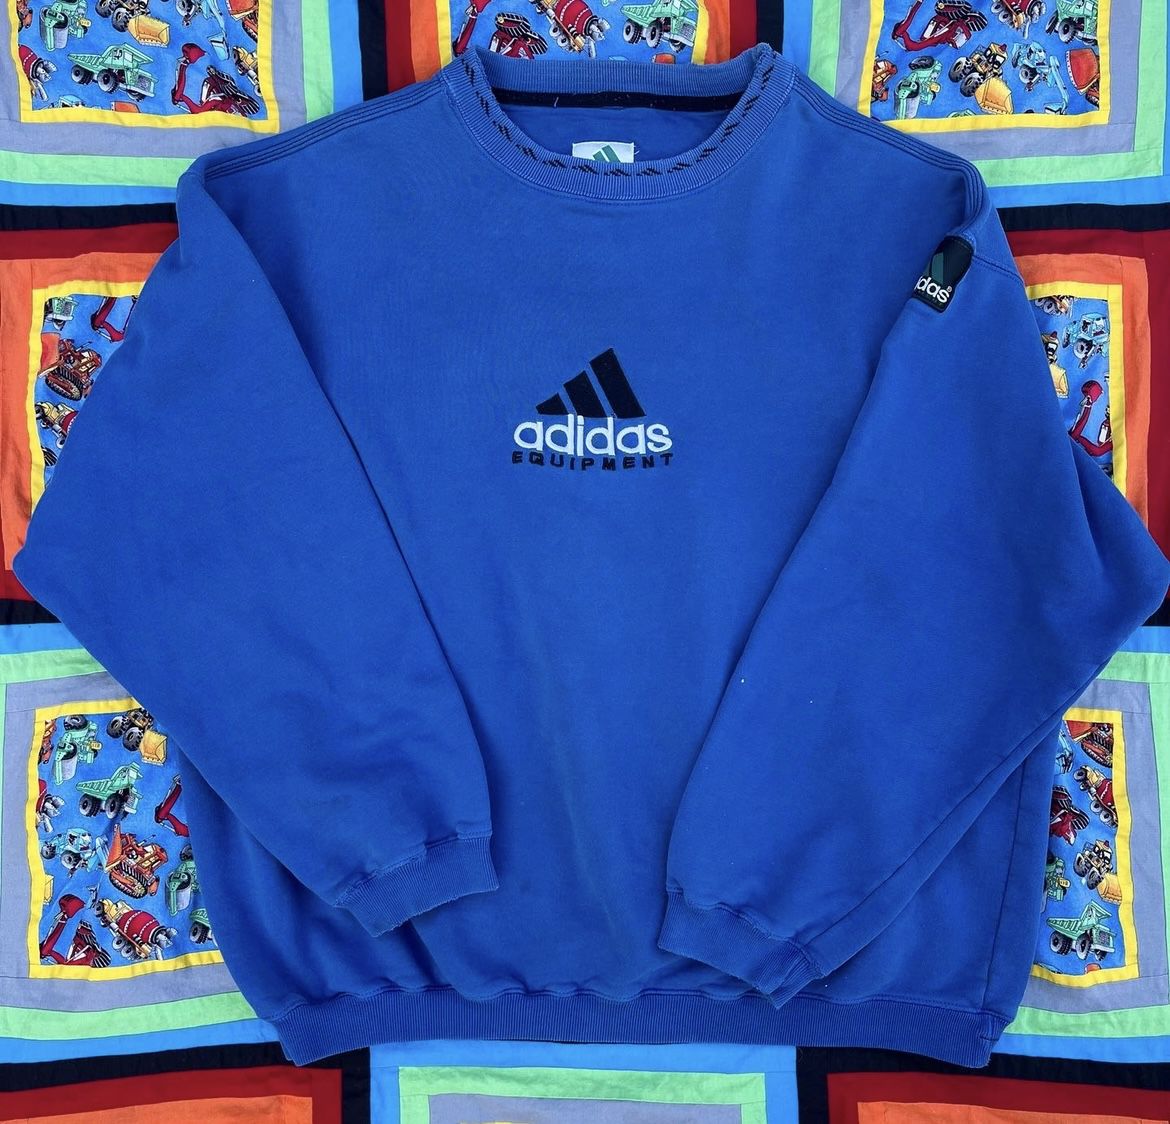 Madeliefje Prooi kruising Vintage Adidas Equipment Sweater for Sale in Whittier, CA - OfferUp